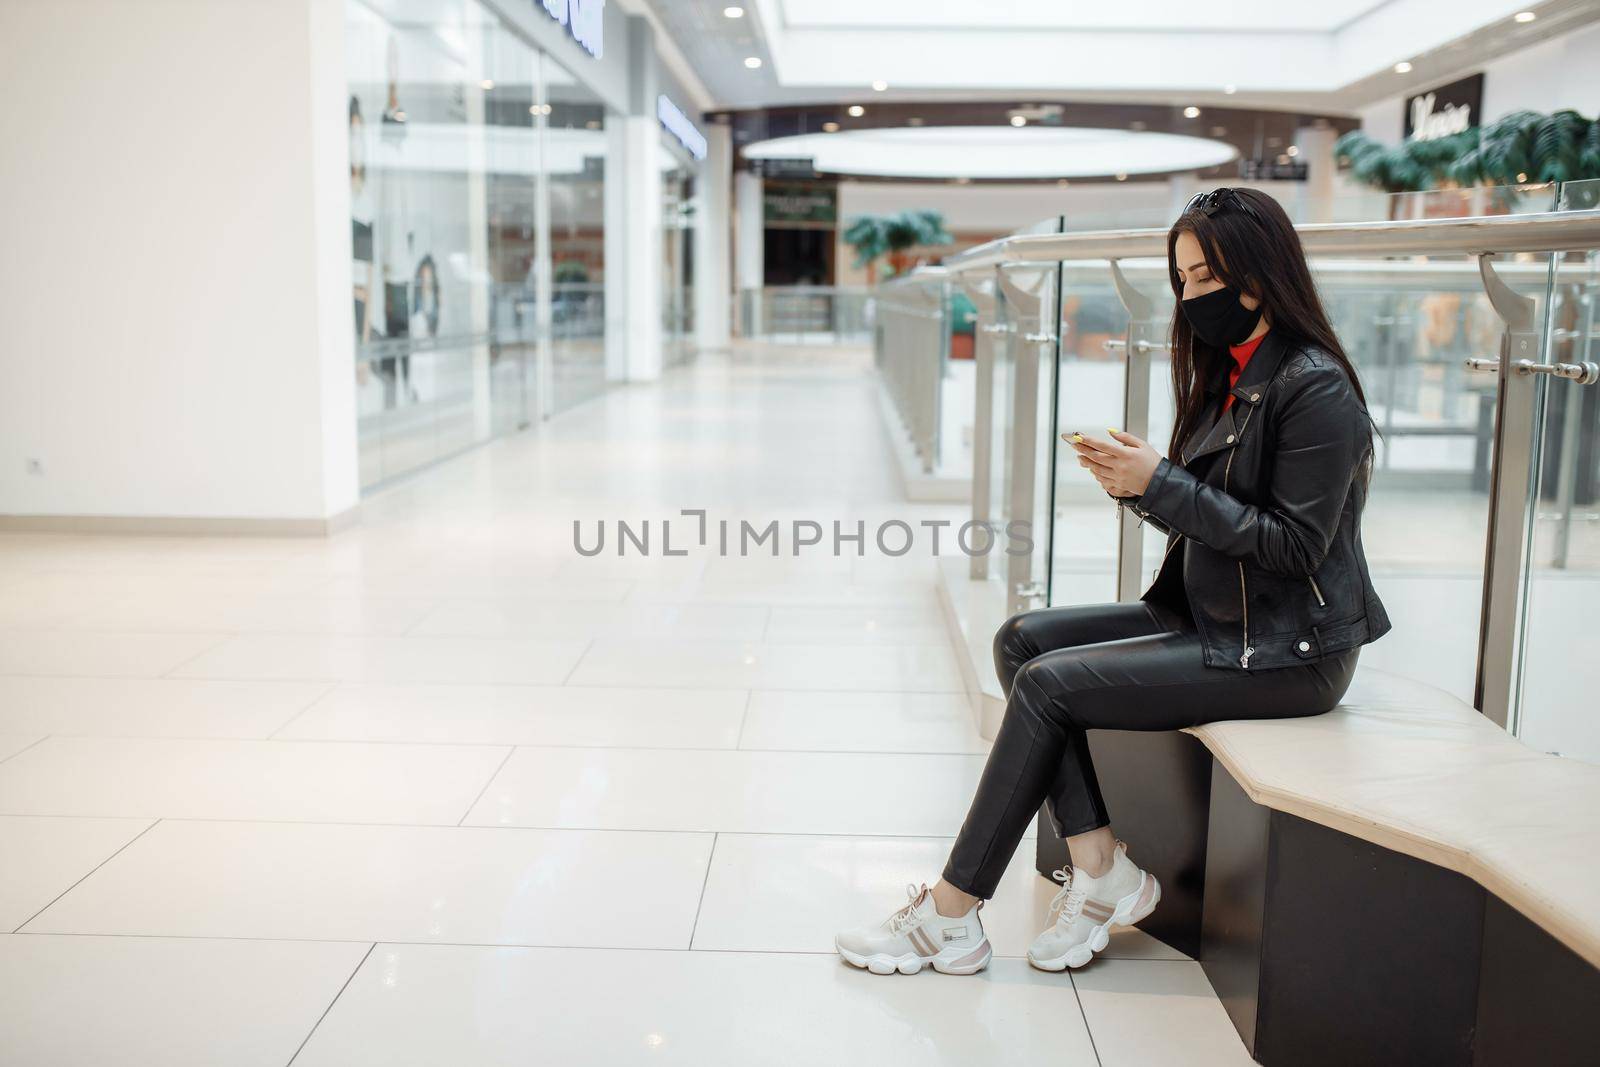 Girl with medical black mask and mobile phone in a shopping center. Coronavirus pandemic. A woman with a mask is standing in a shopping center by UcheaD